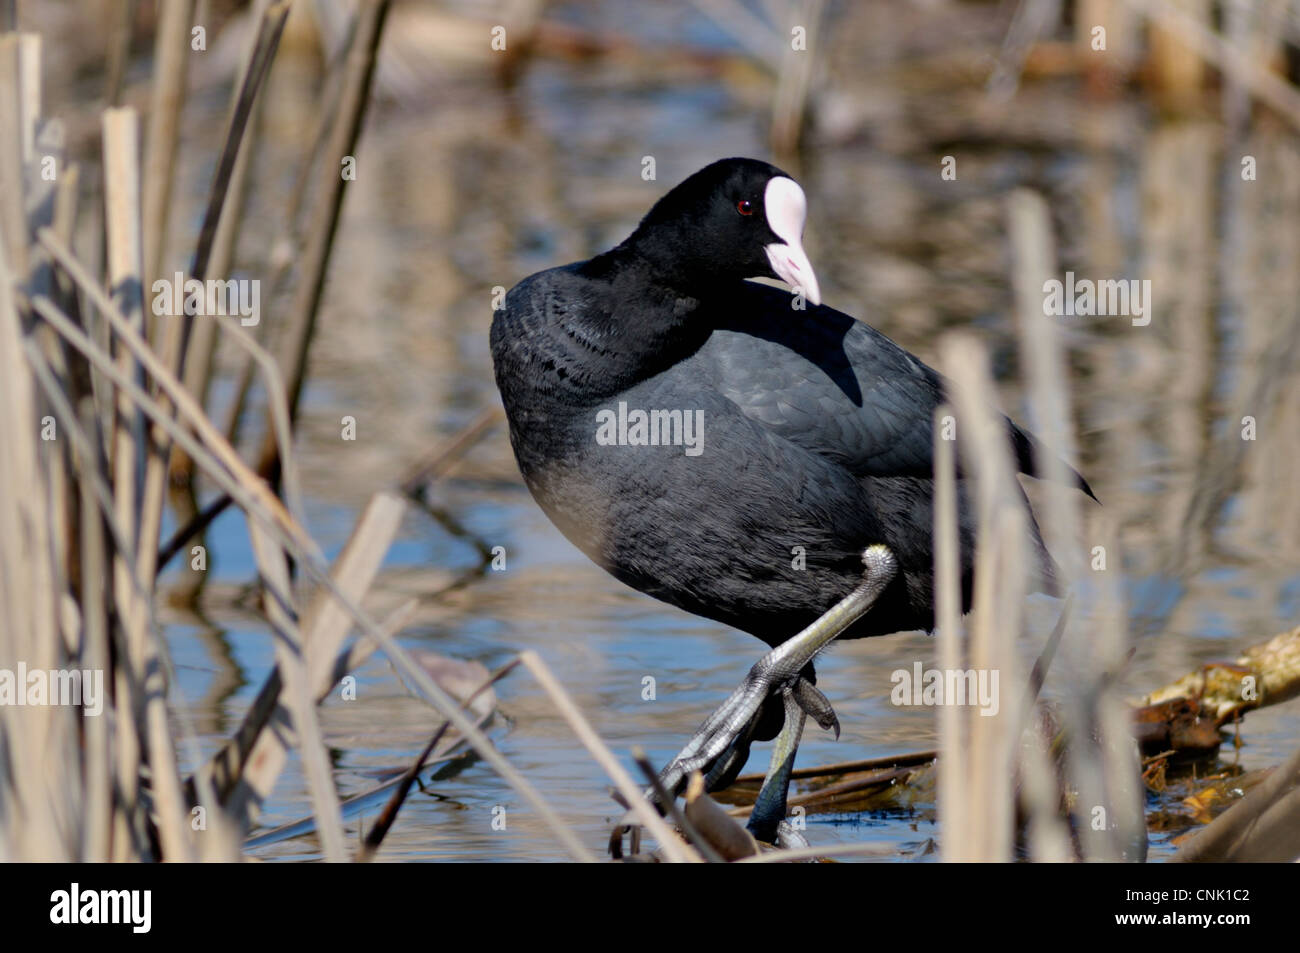 Euroasian coot -Fulica atra in the natural environment Stock Photo